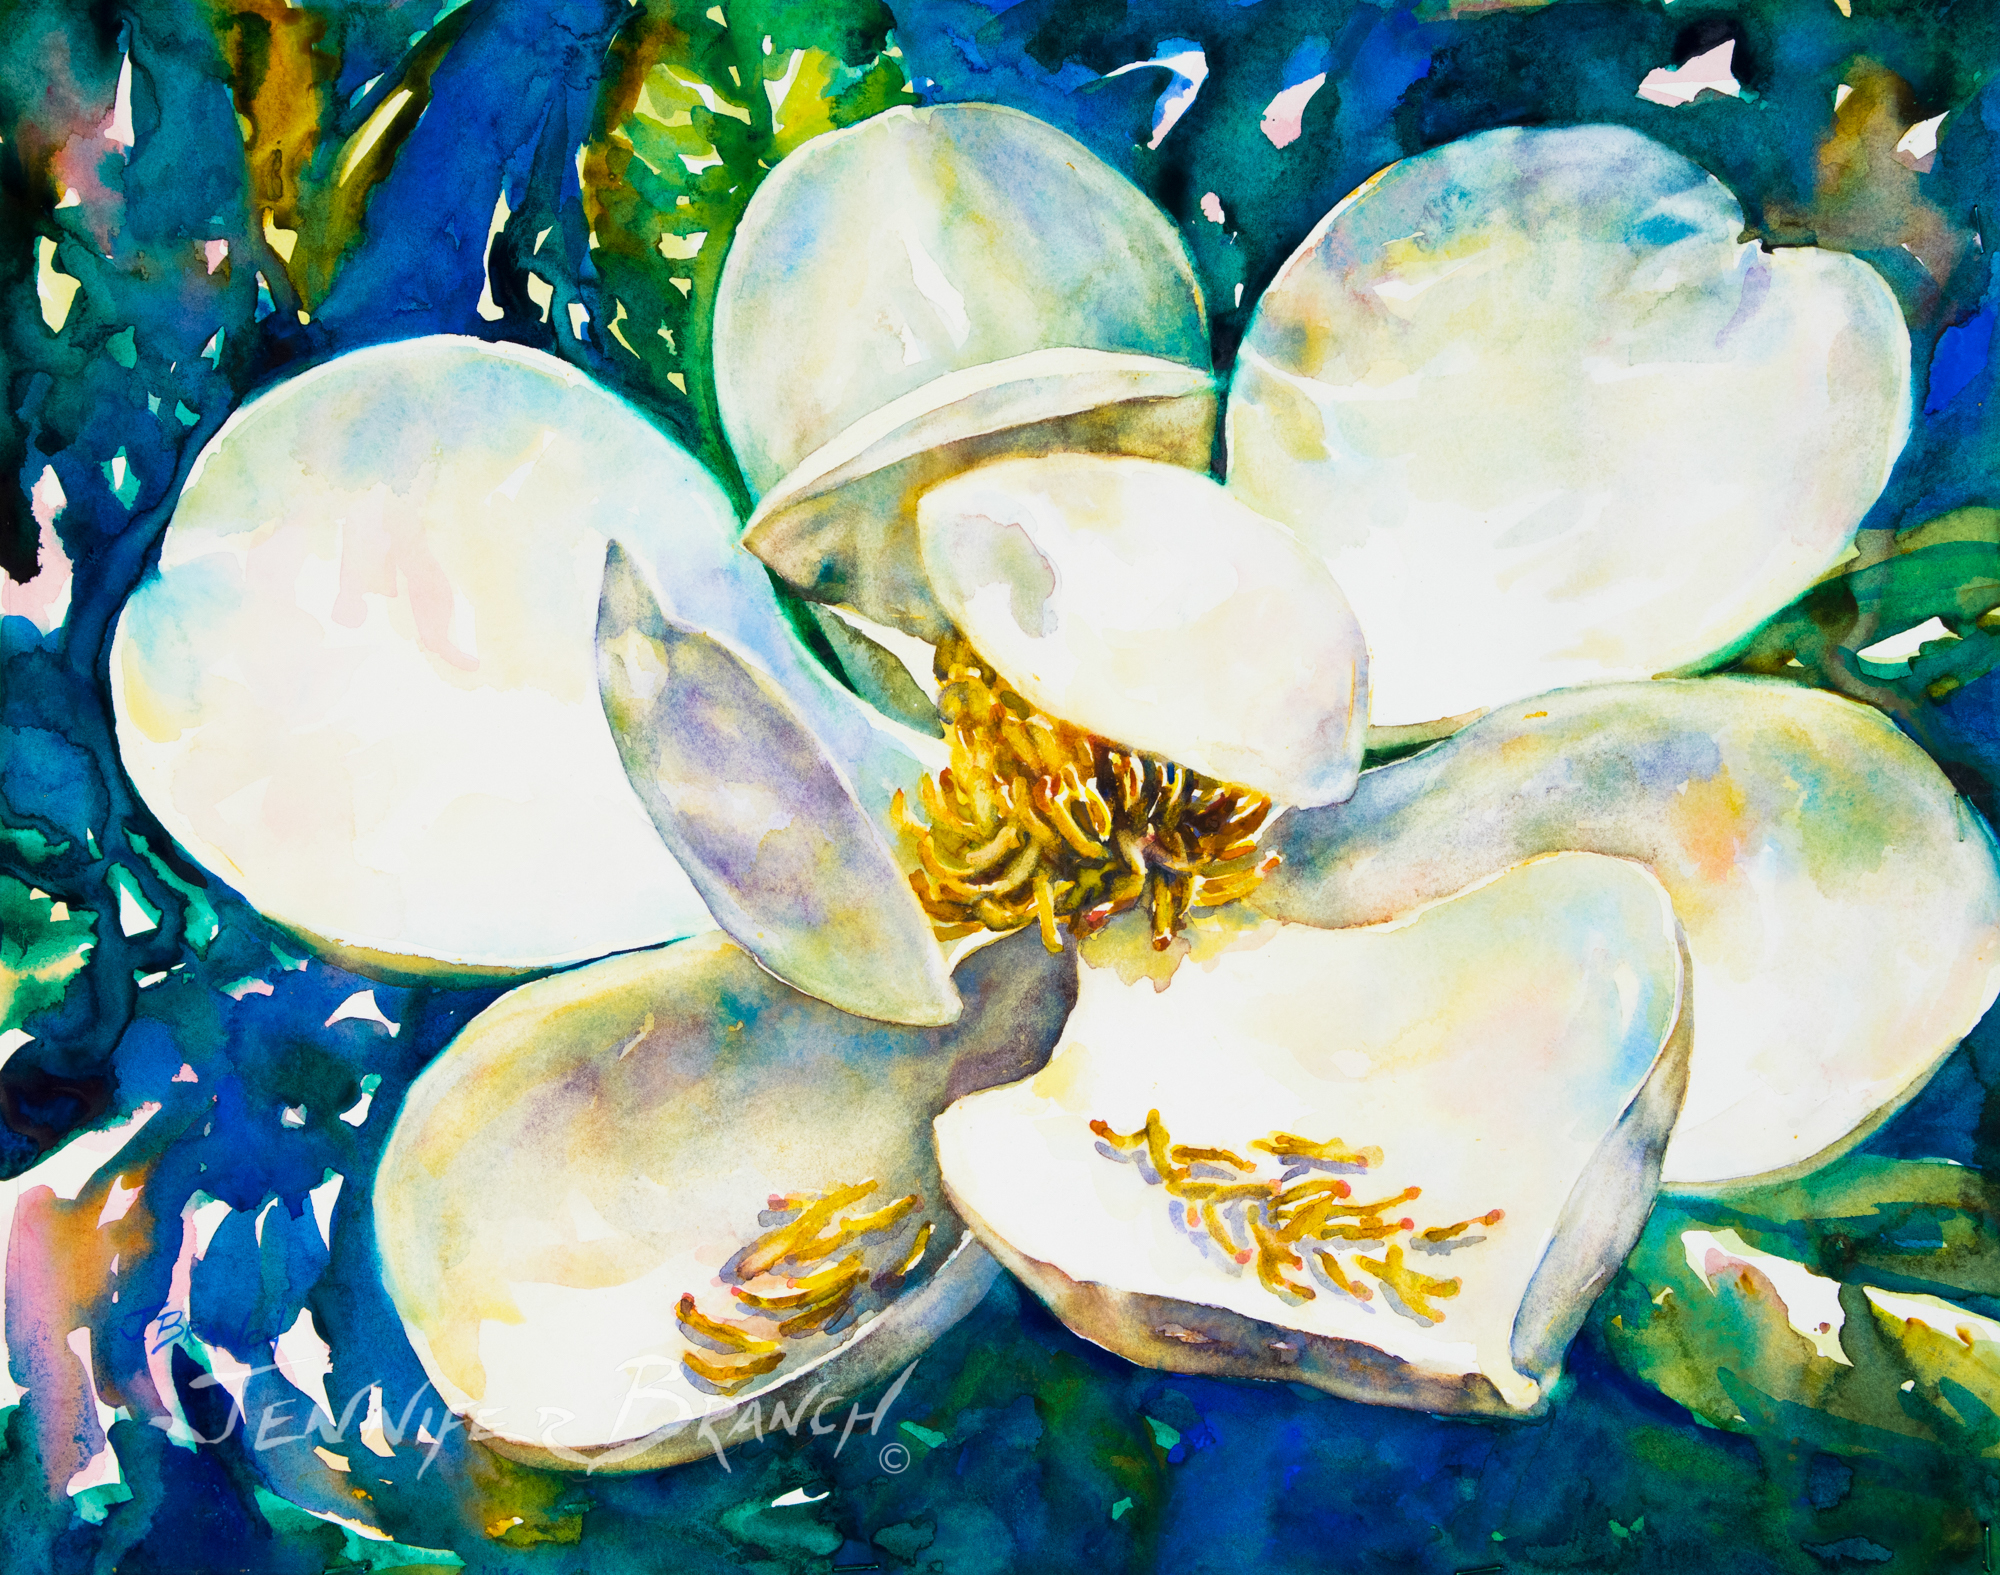 Magnolia flower watercolor painting by Jennifer Branch.